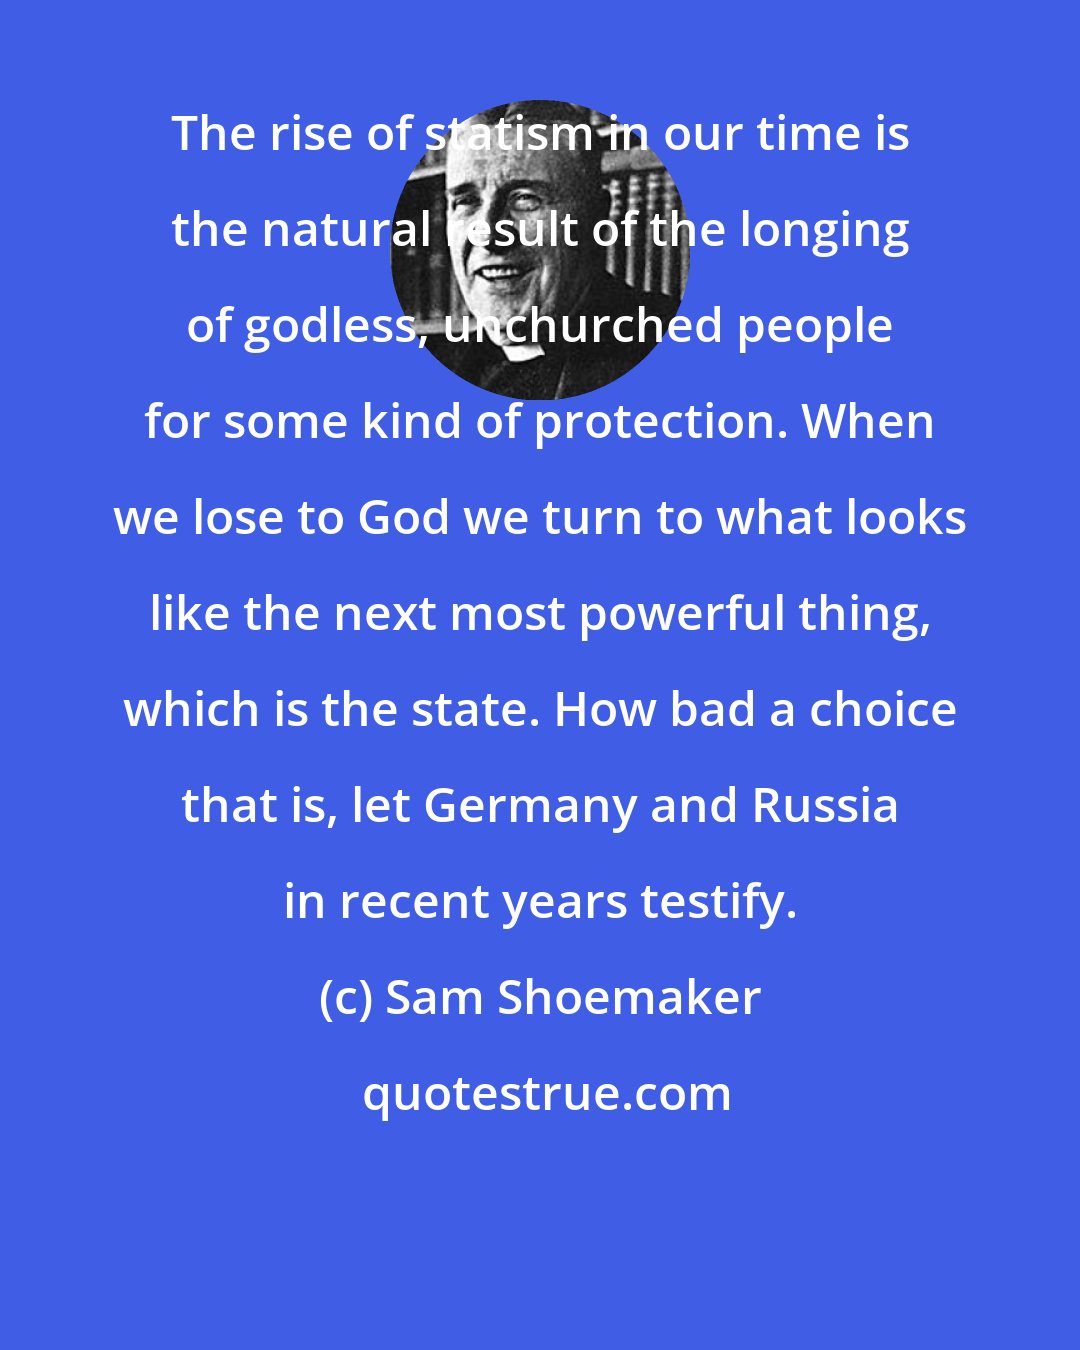 Sam Shoemaker: The rise of statism in our time is the natural result of the longing of godless, unchurched people for some kind of protection. When we lose to God we turn to what looks like the next most powerful thing, which is the state. How bad a choice that is, let Germany and Russia in recent years testify.